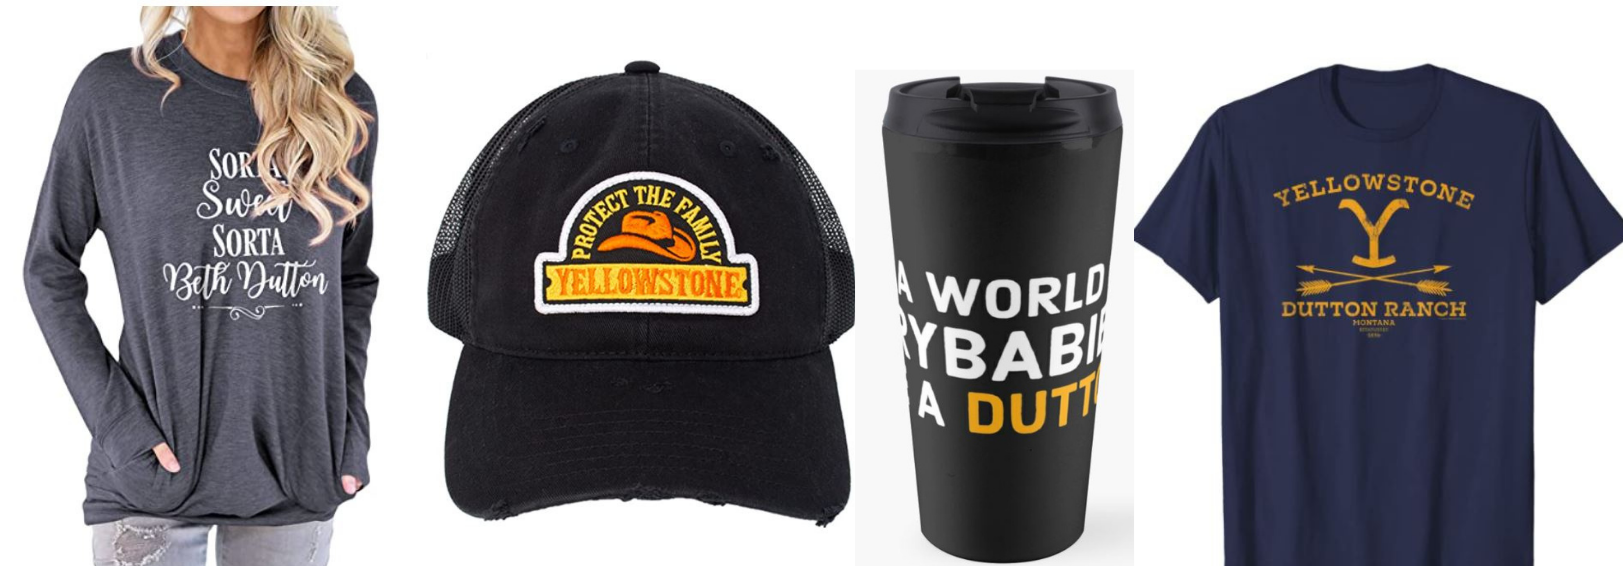 14 gifts for Yellowstone fans